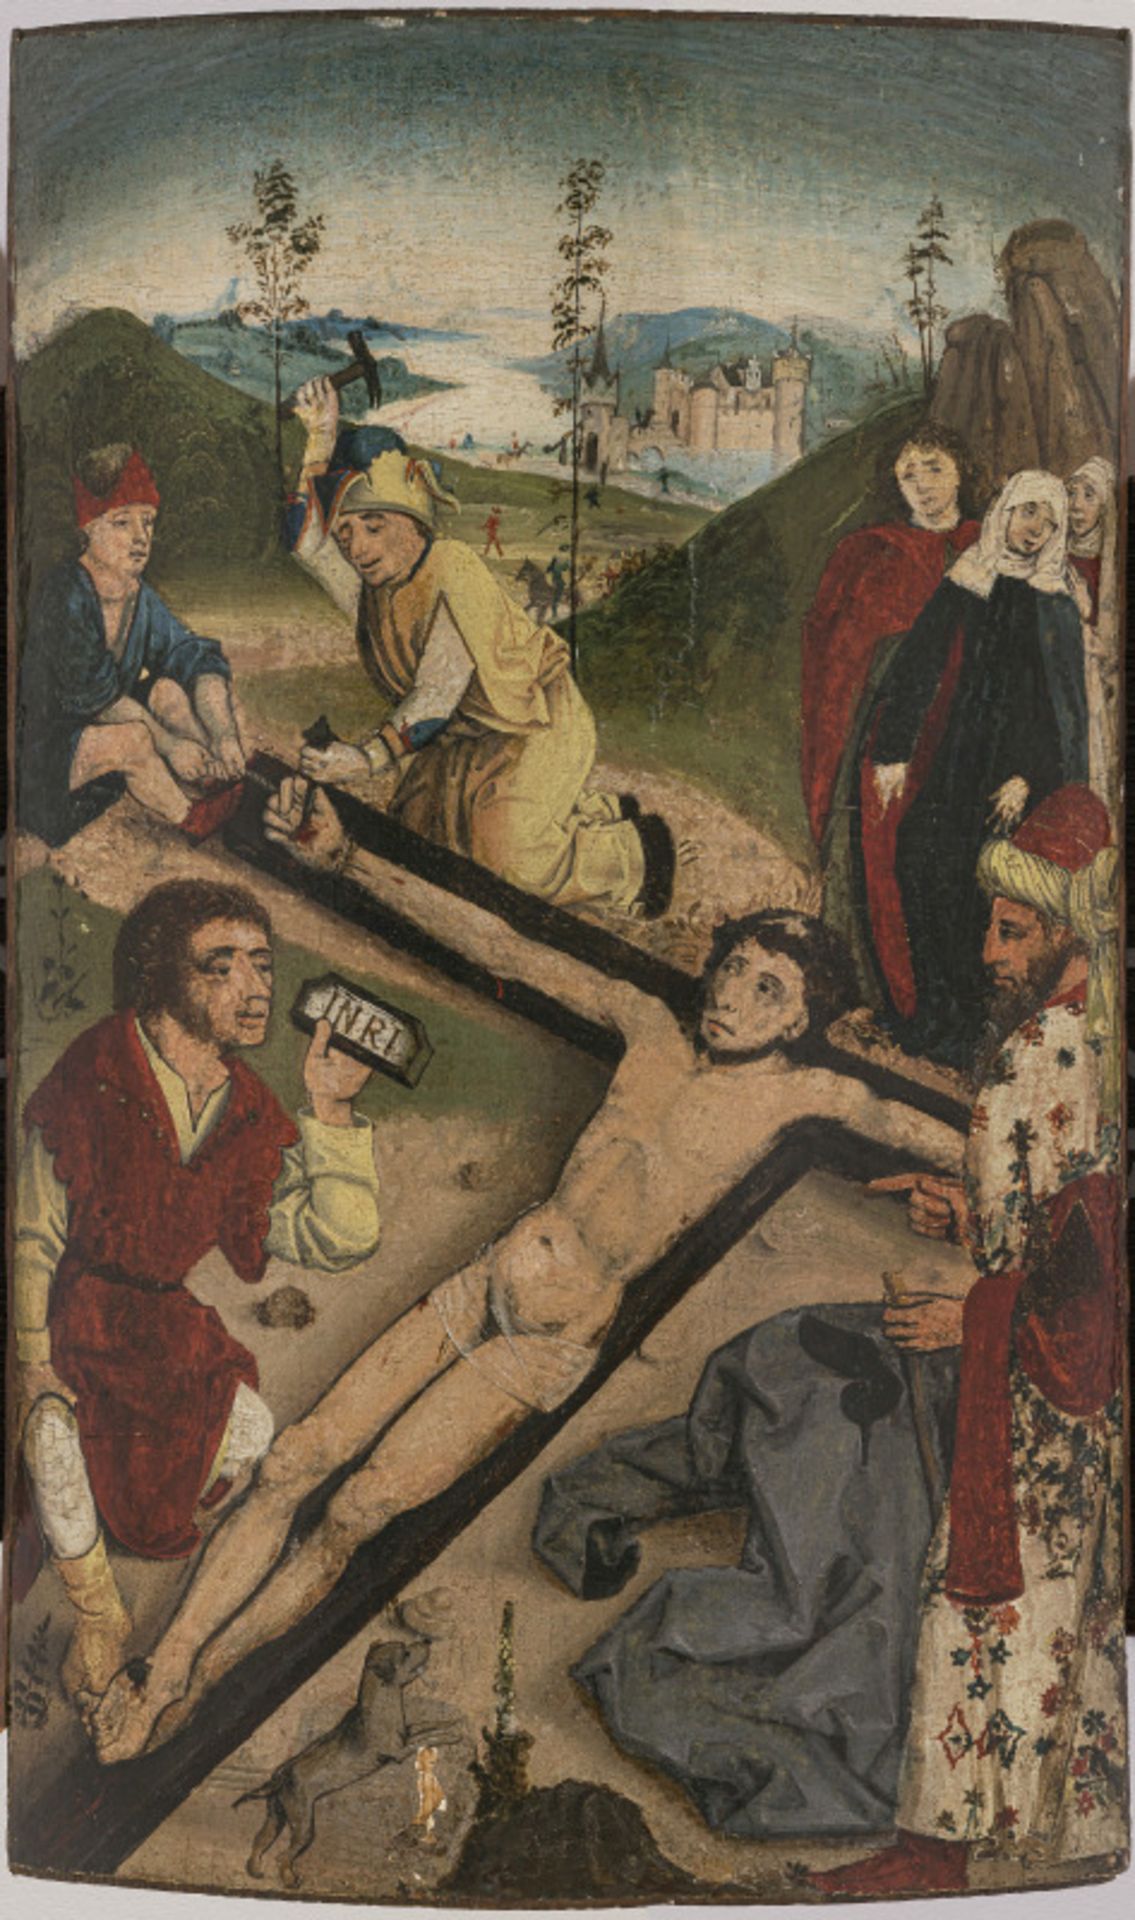 Süddeutsch circa 1500 - Christ is nailed to the cross